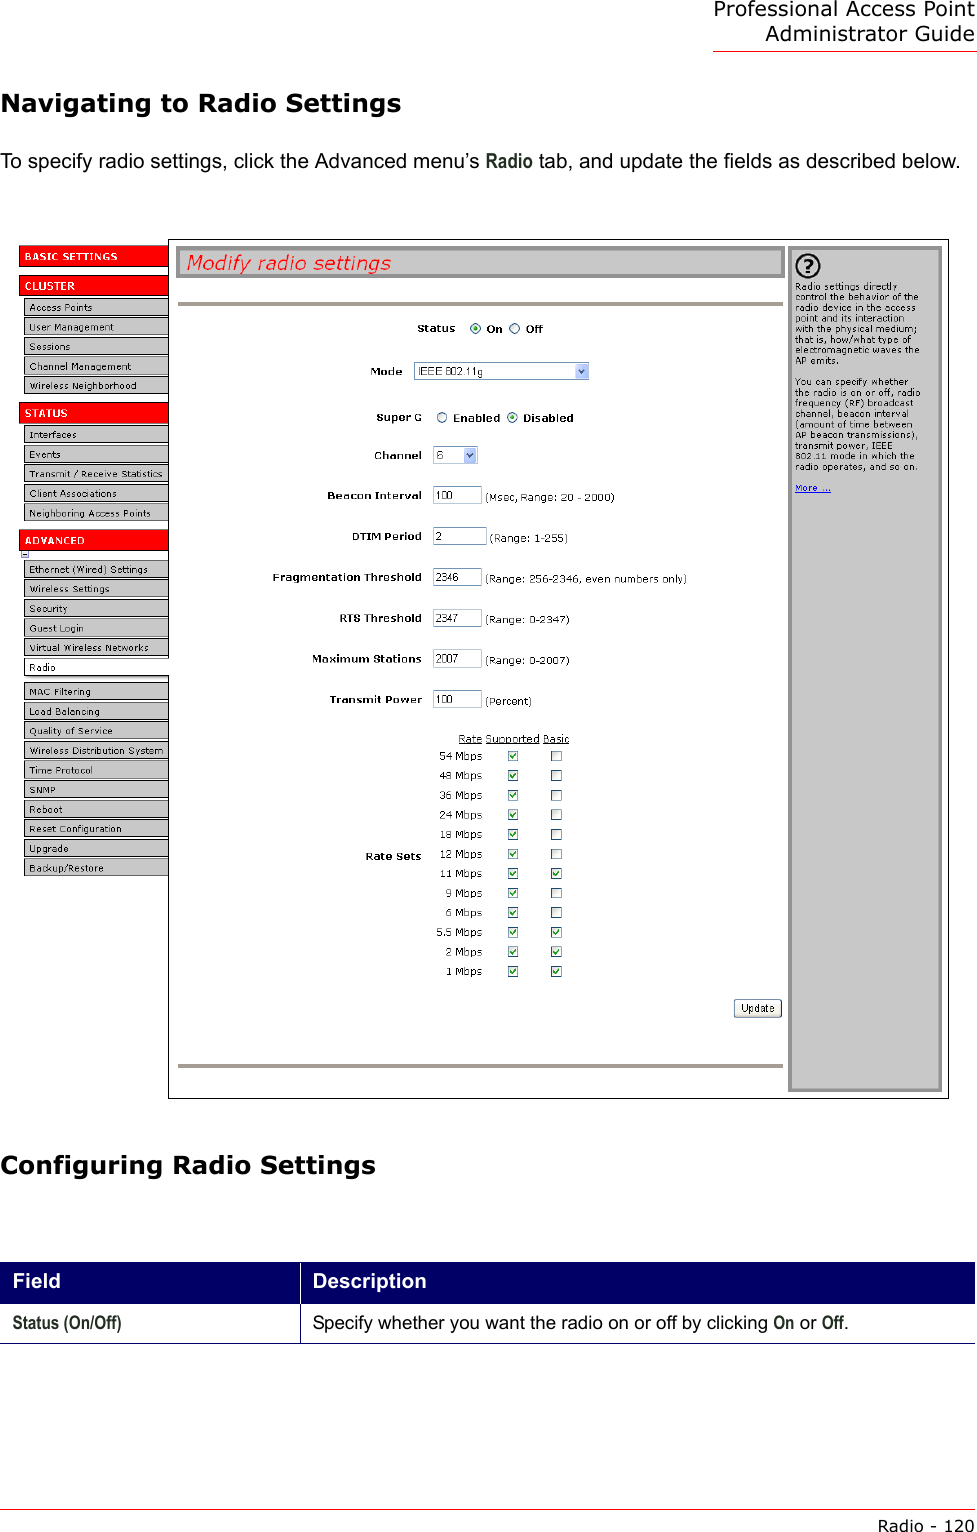 Professional Access Point Administrator GuideRadio - 120Navigating to Radio SettingsTo specify radio settings, click the Advanced menu’s Radio tab, and update the fields as described below.Configuring Radio Settings Field DescriptionStatus (On/Off) Specify whether you want the radio on or off by clicking On or Off.